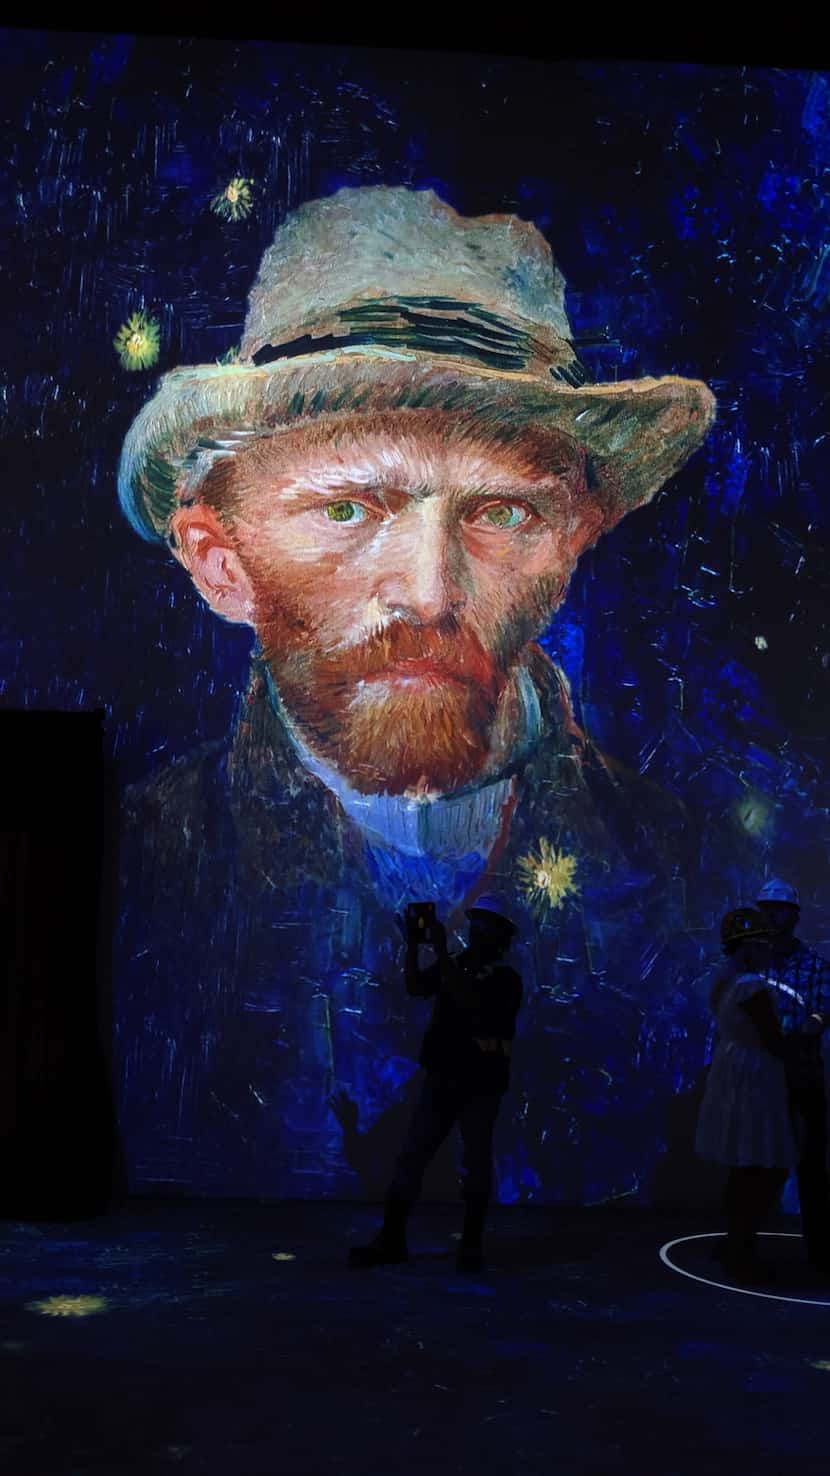 One section of "Immersive Van Gogh Exhibit" projects a series of self-portraits by the Dutch...